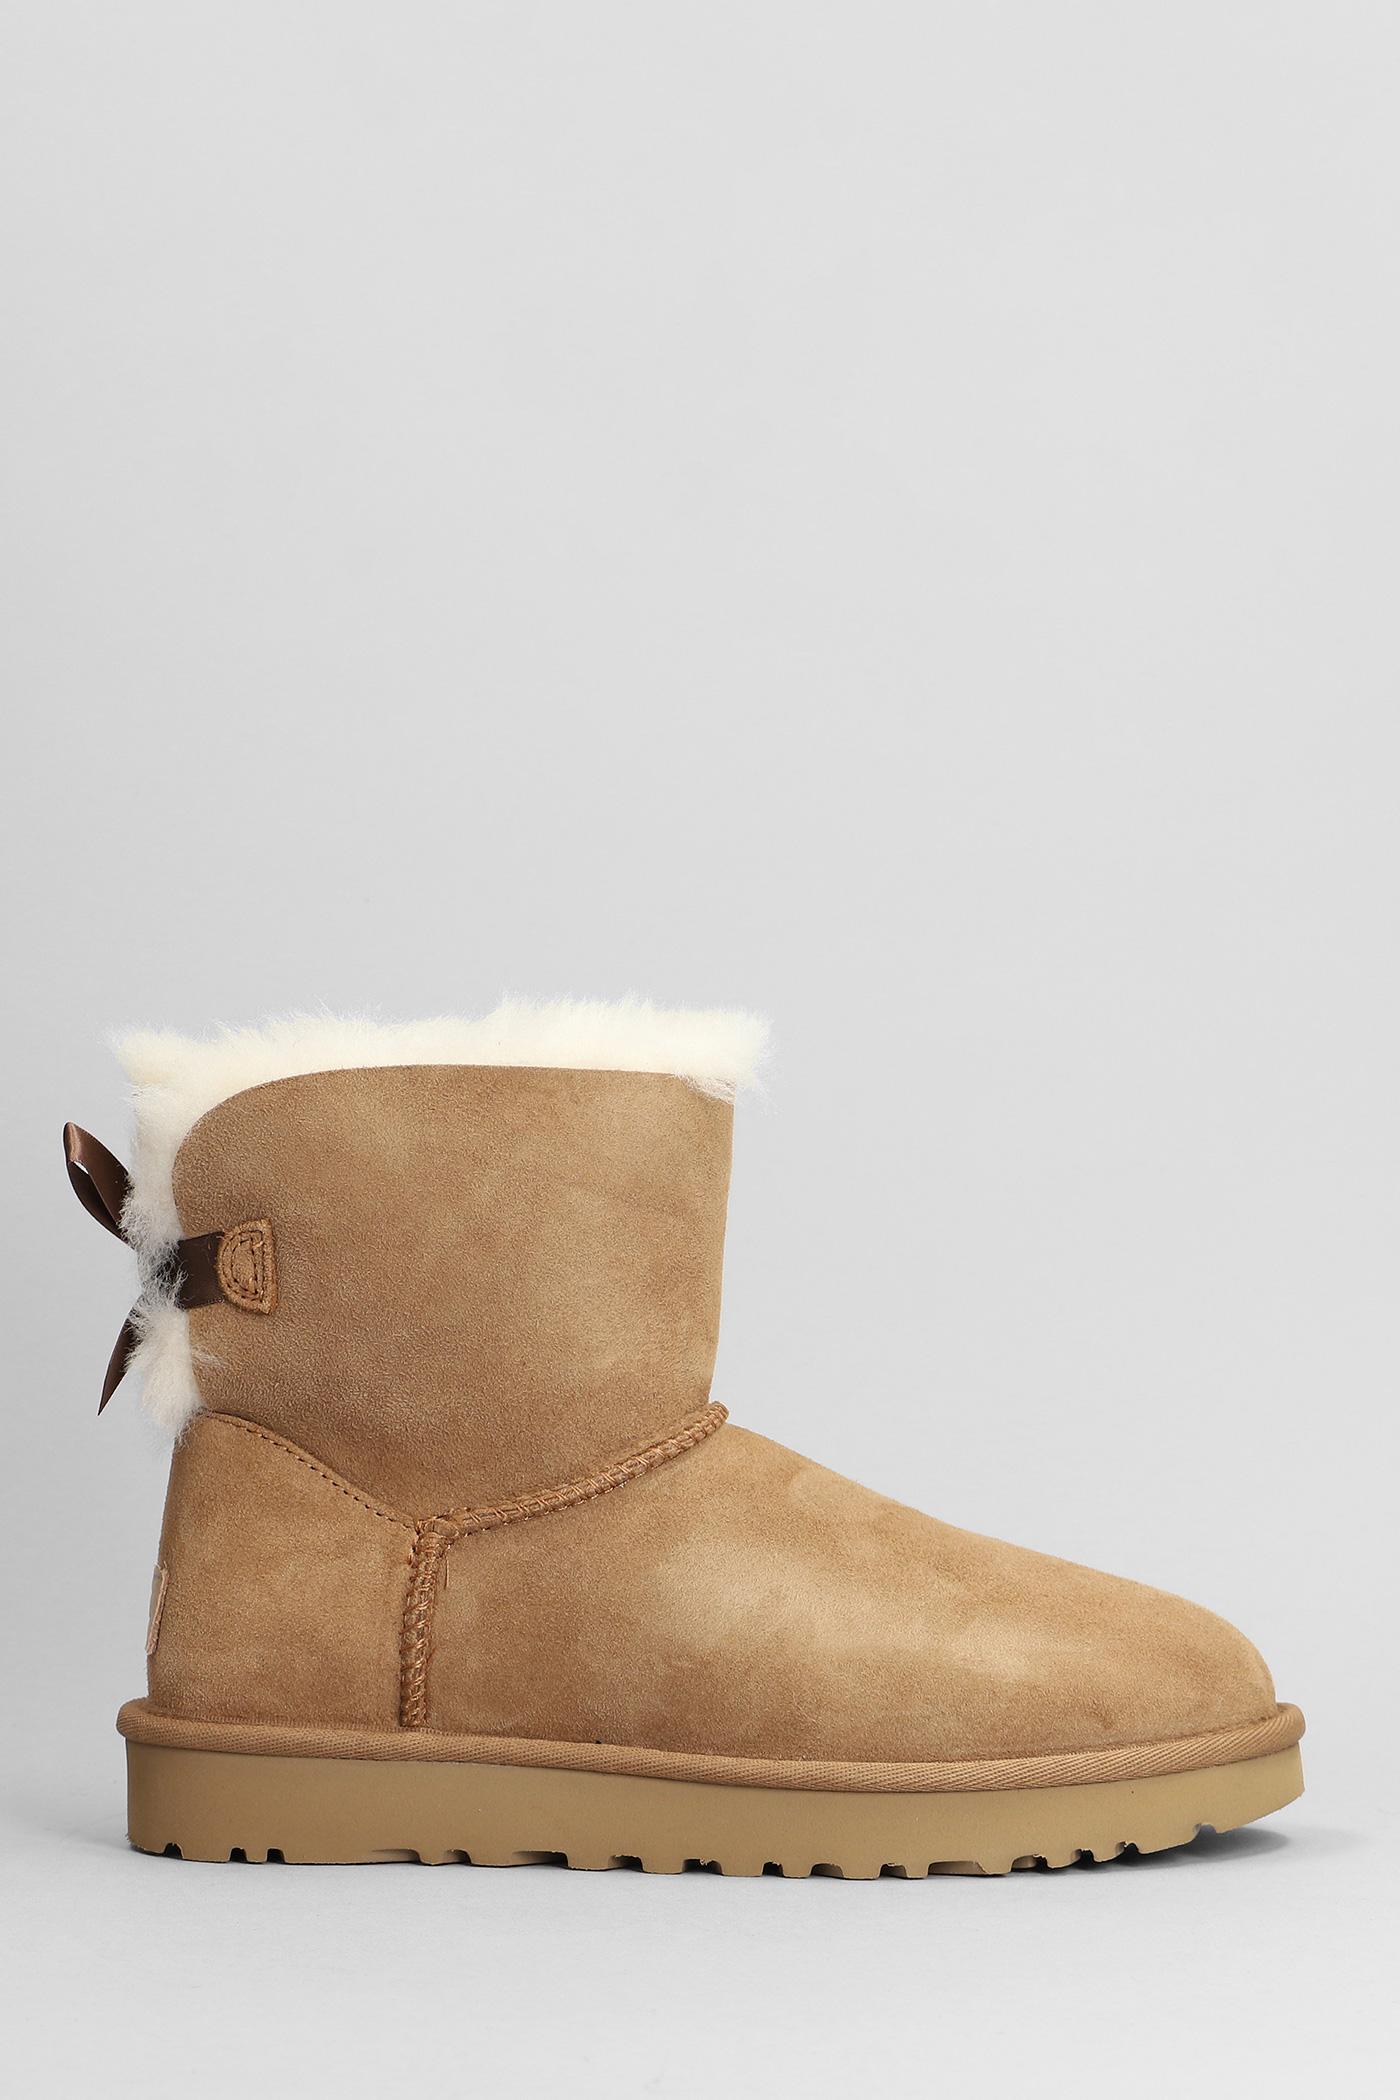 https://cdna.lystit.com/photos/deliberti/2cdc0f72/ugg-leather-color-Mini-Bailey-Bow-Ii-Low-Heels-Ankle-Boots-In-Leather-Color-Suede.jpeg